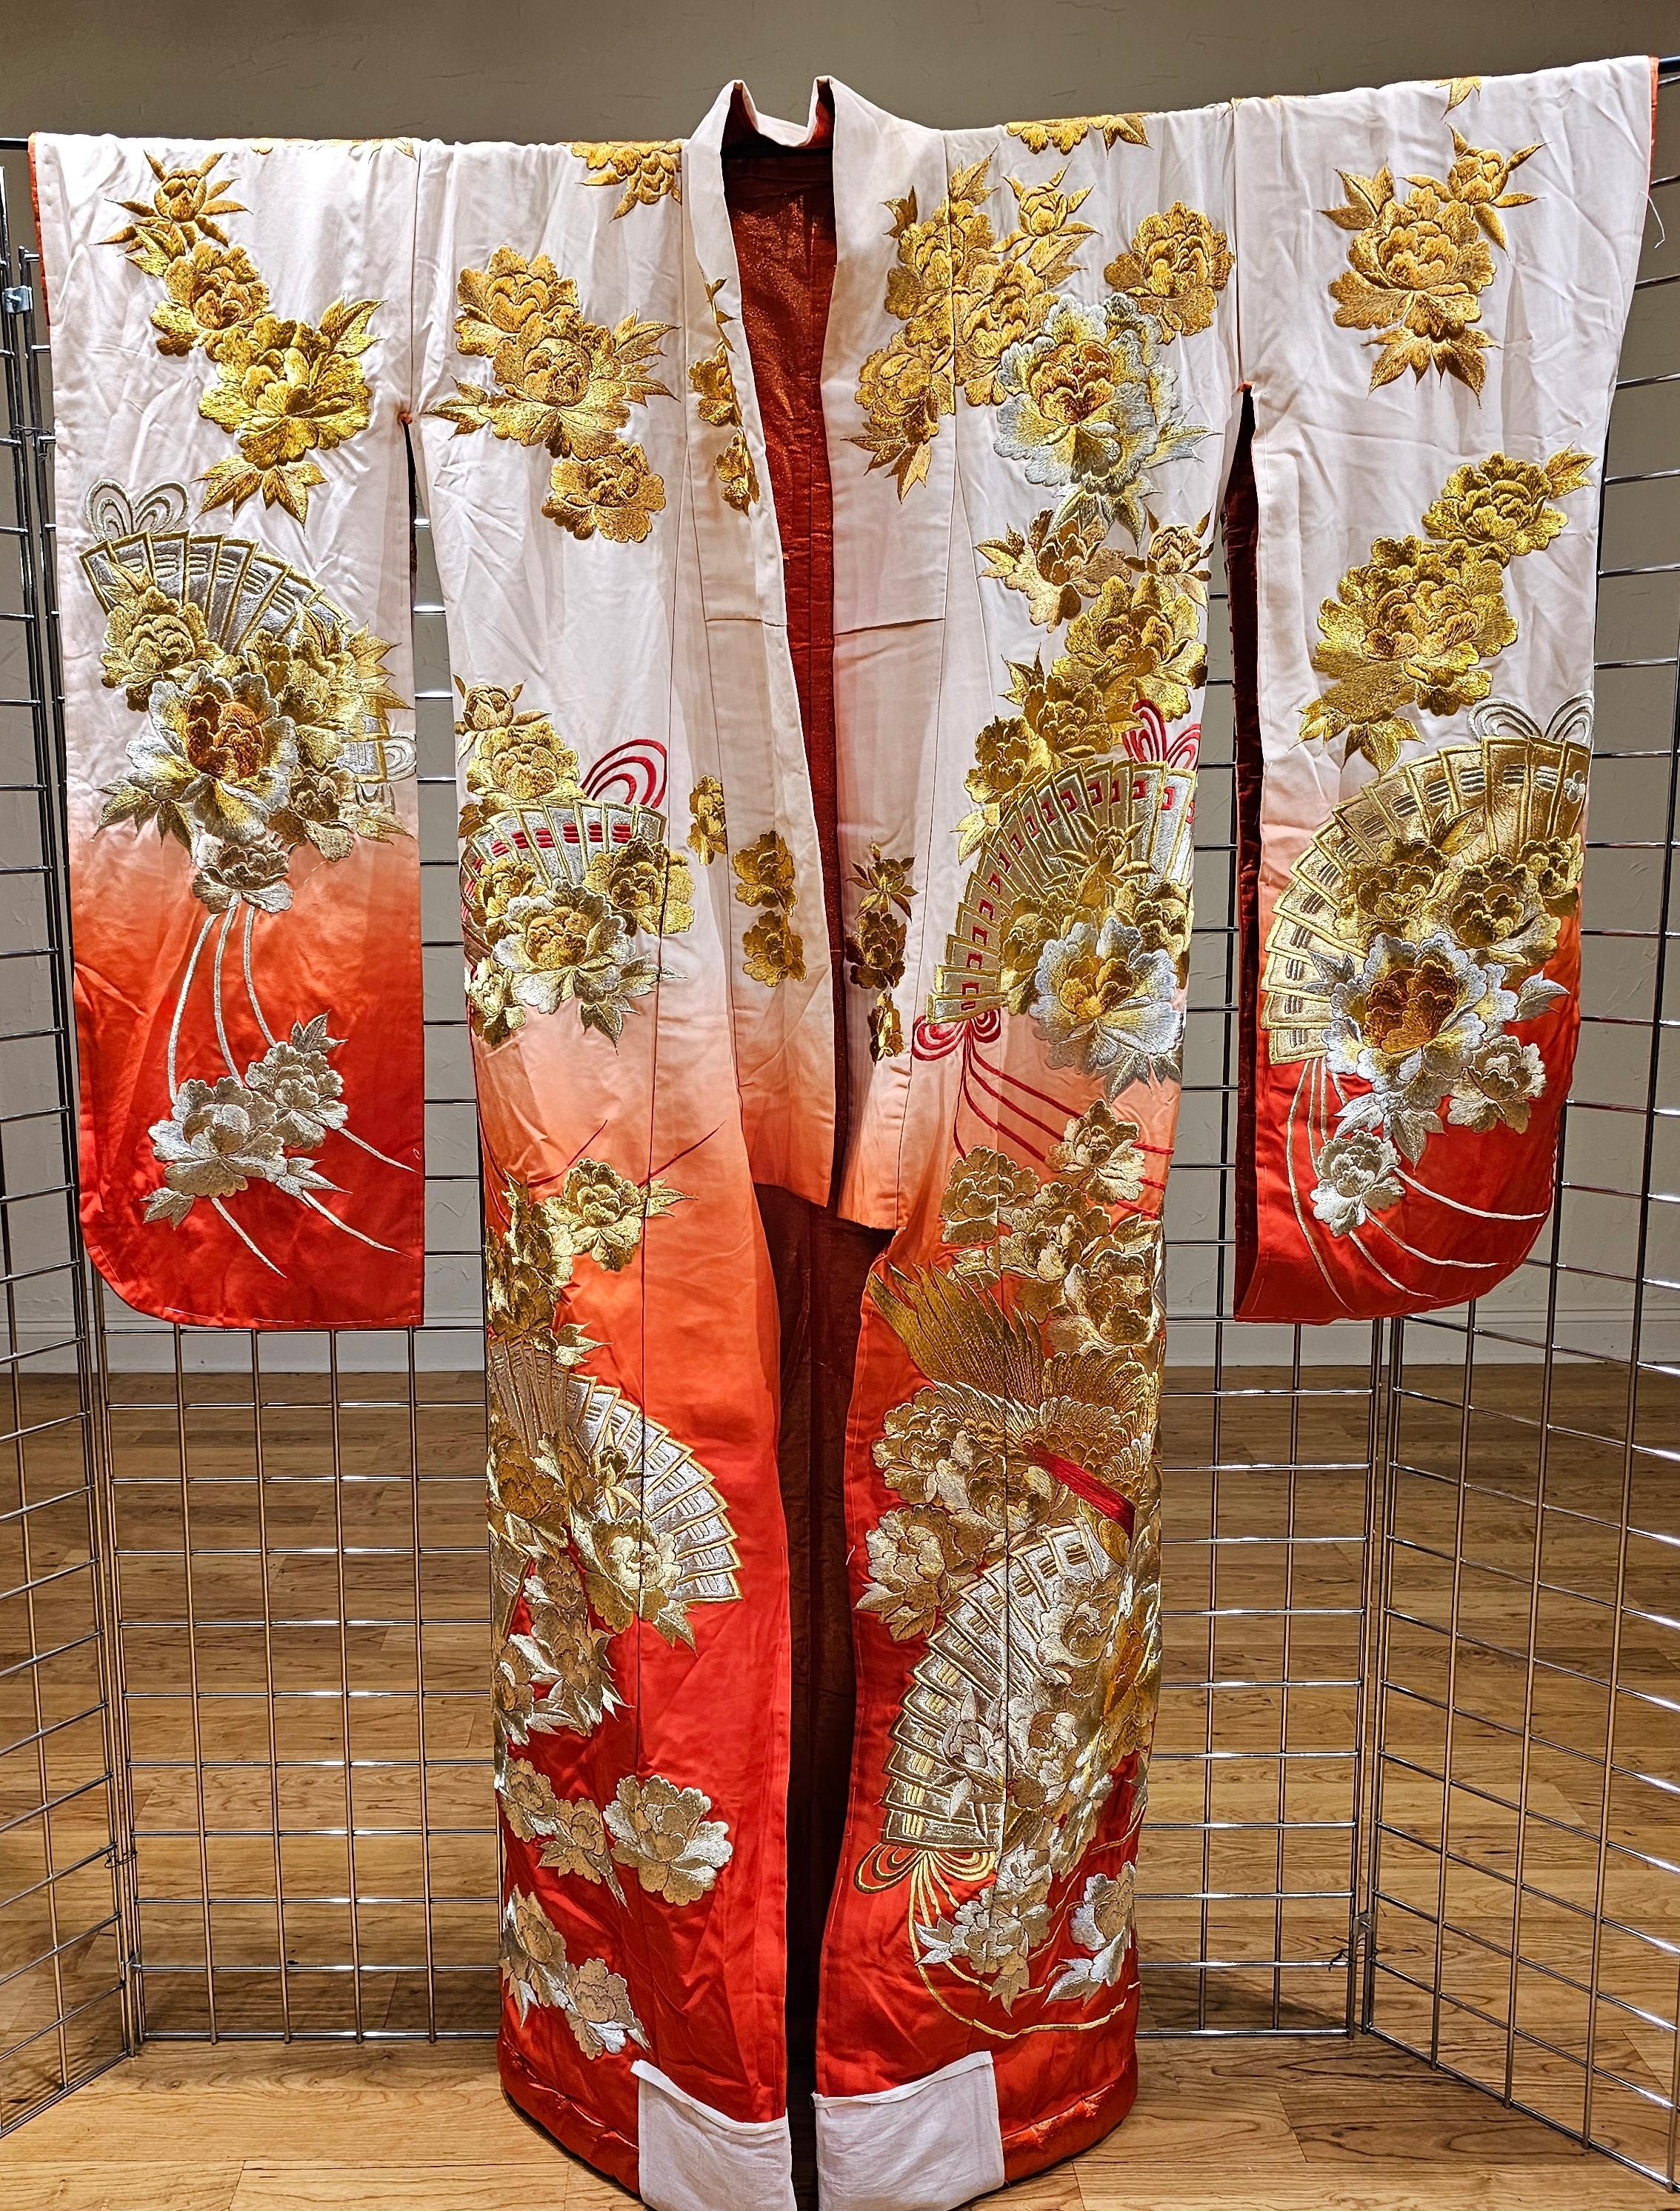 Visually striking vintage Uchikake Wedding Kimono/Robe for ceremonial occasion, circa end of Meiji to Taisho period 1910s-1930s. This bridal outer garment is of a white and  red color that features elaborate and intricate embroidery in gold and red